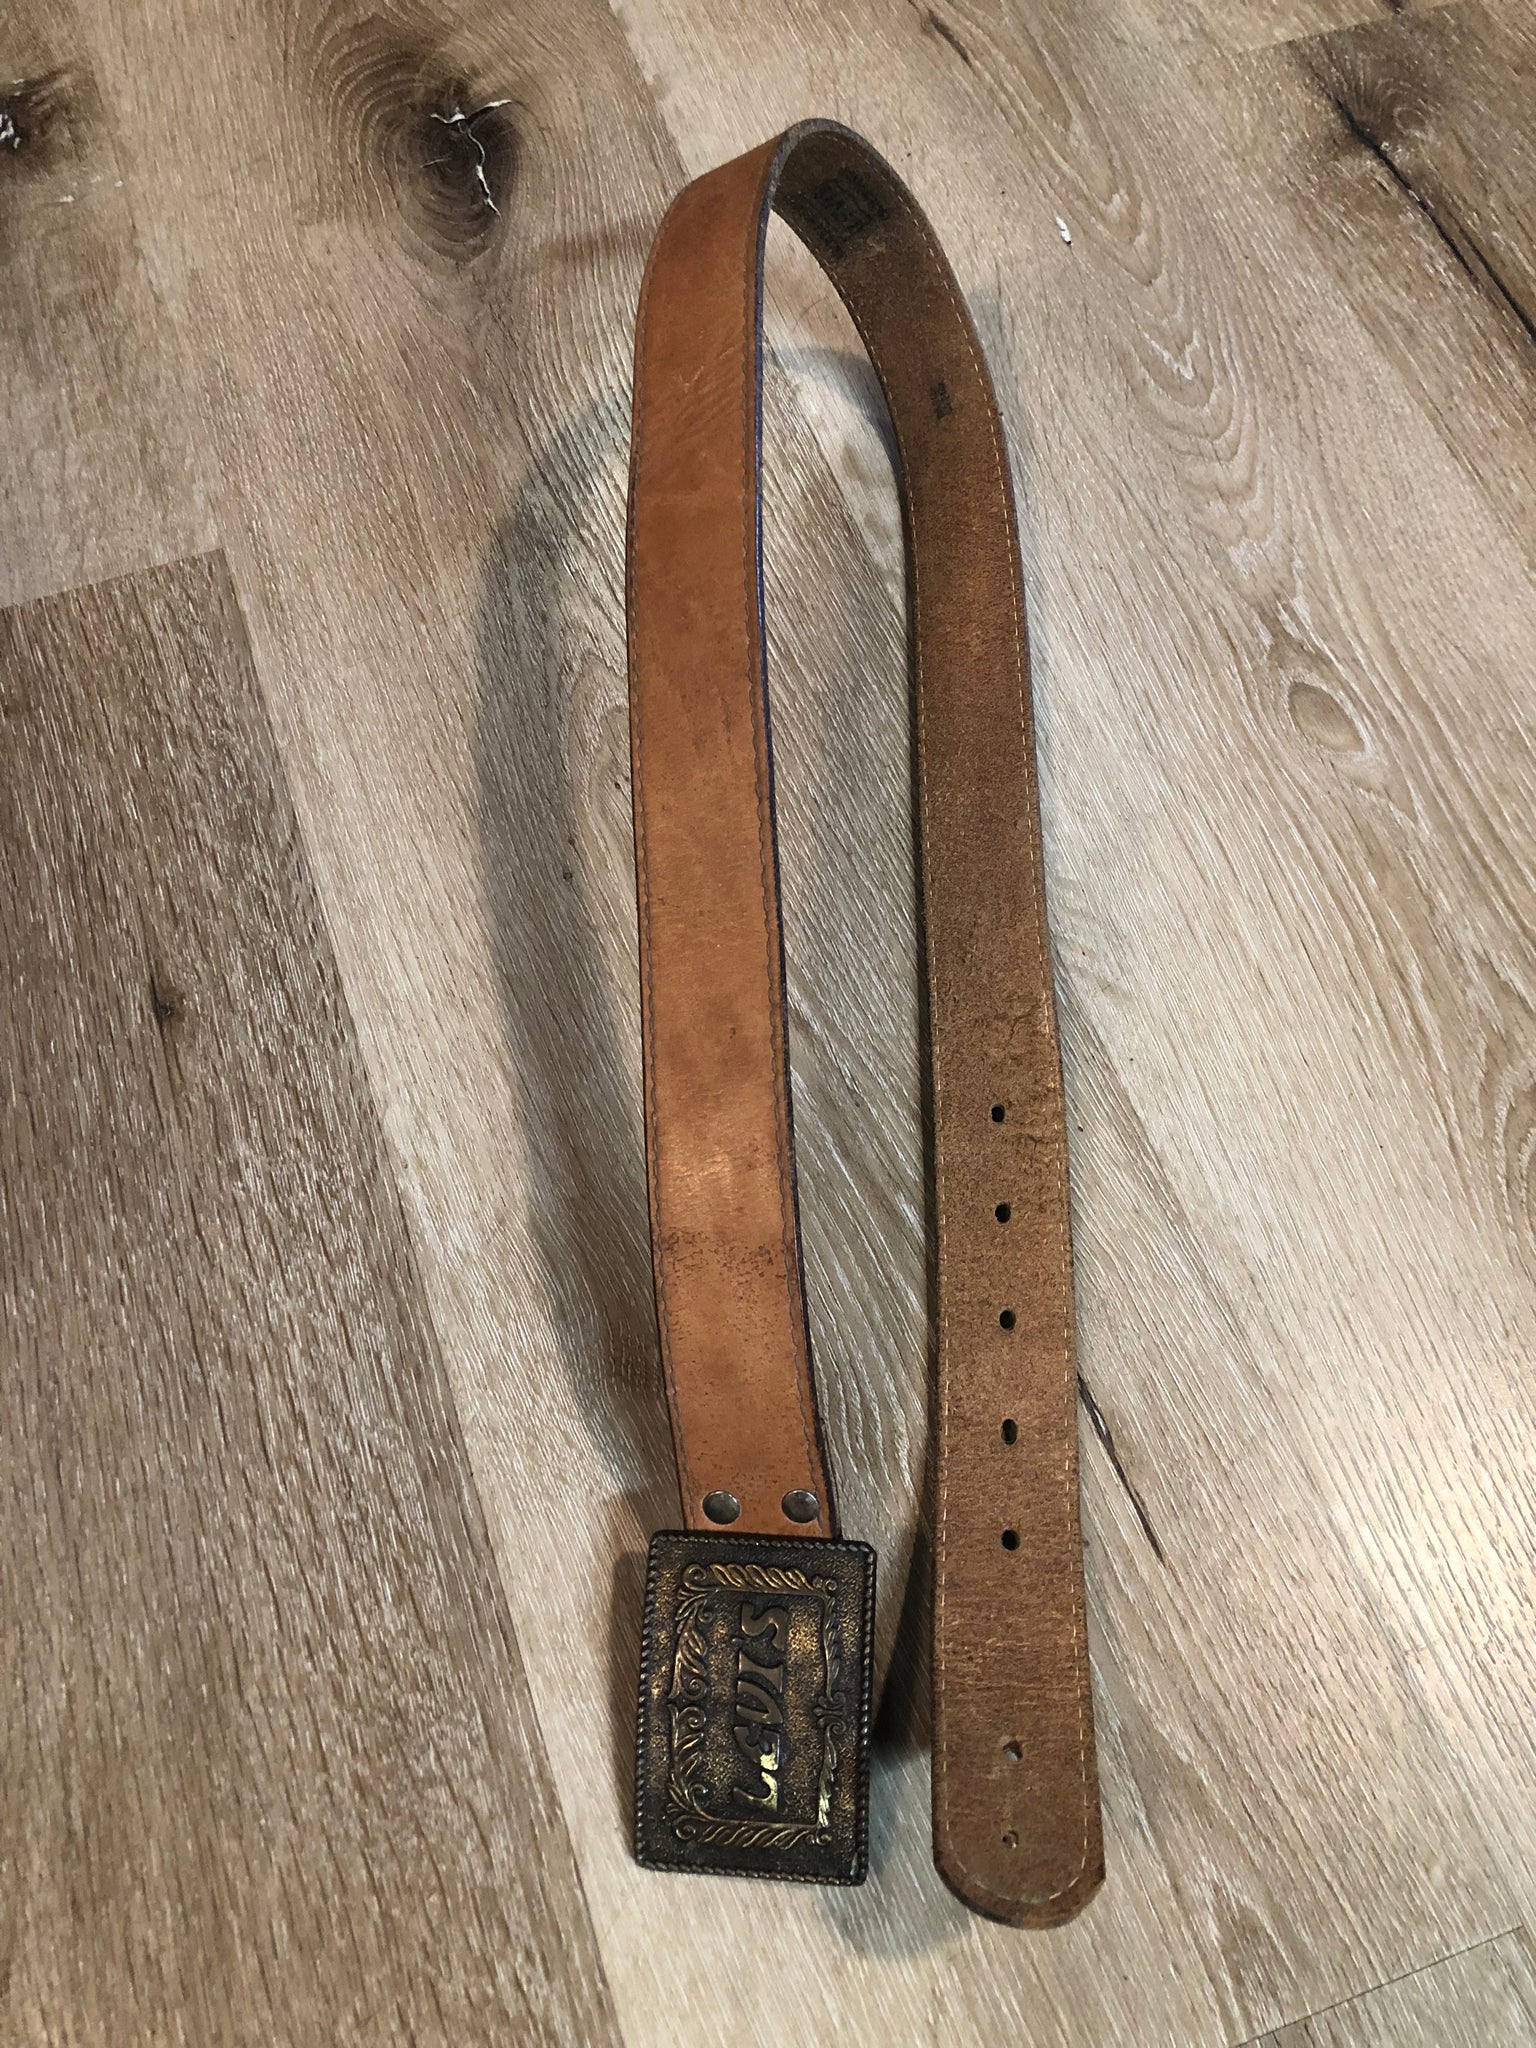 Vintage Levi's Leather Belt with Century Canada Buckle, Made in Canada –  KingsPIER vintage